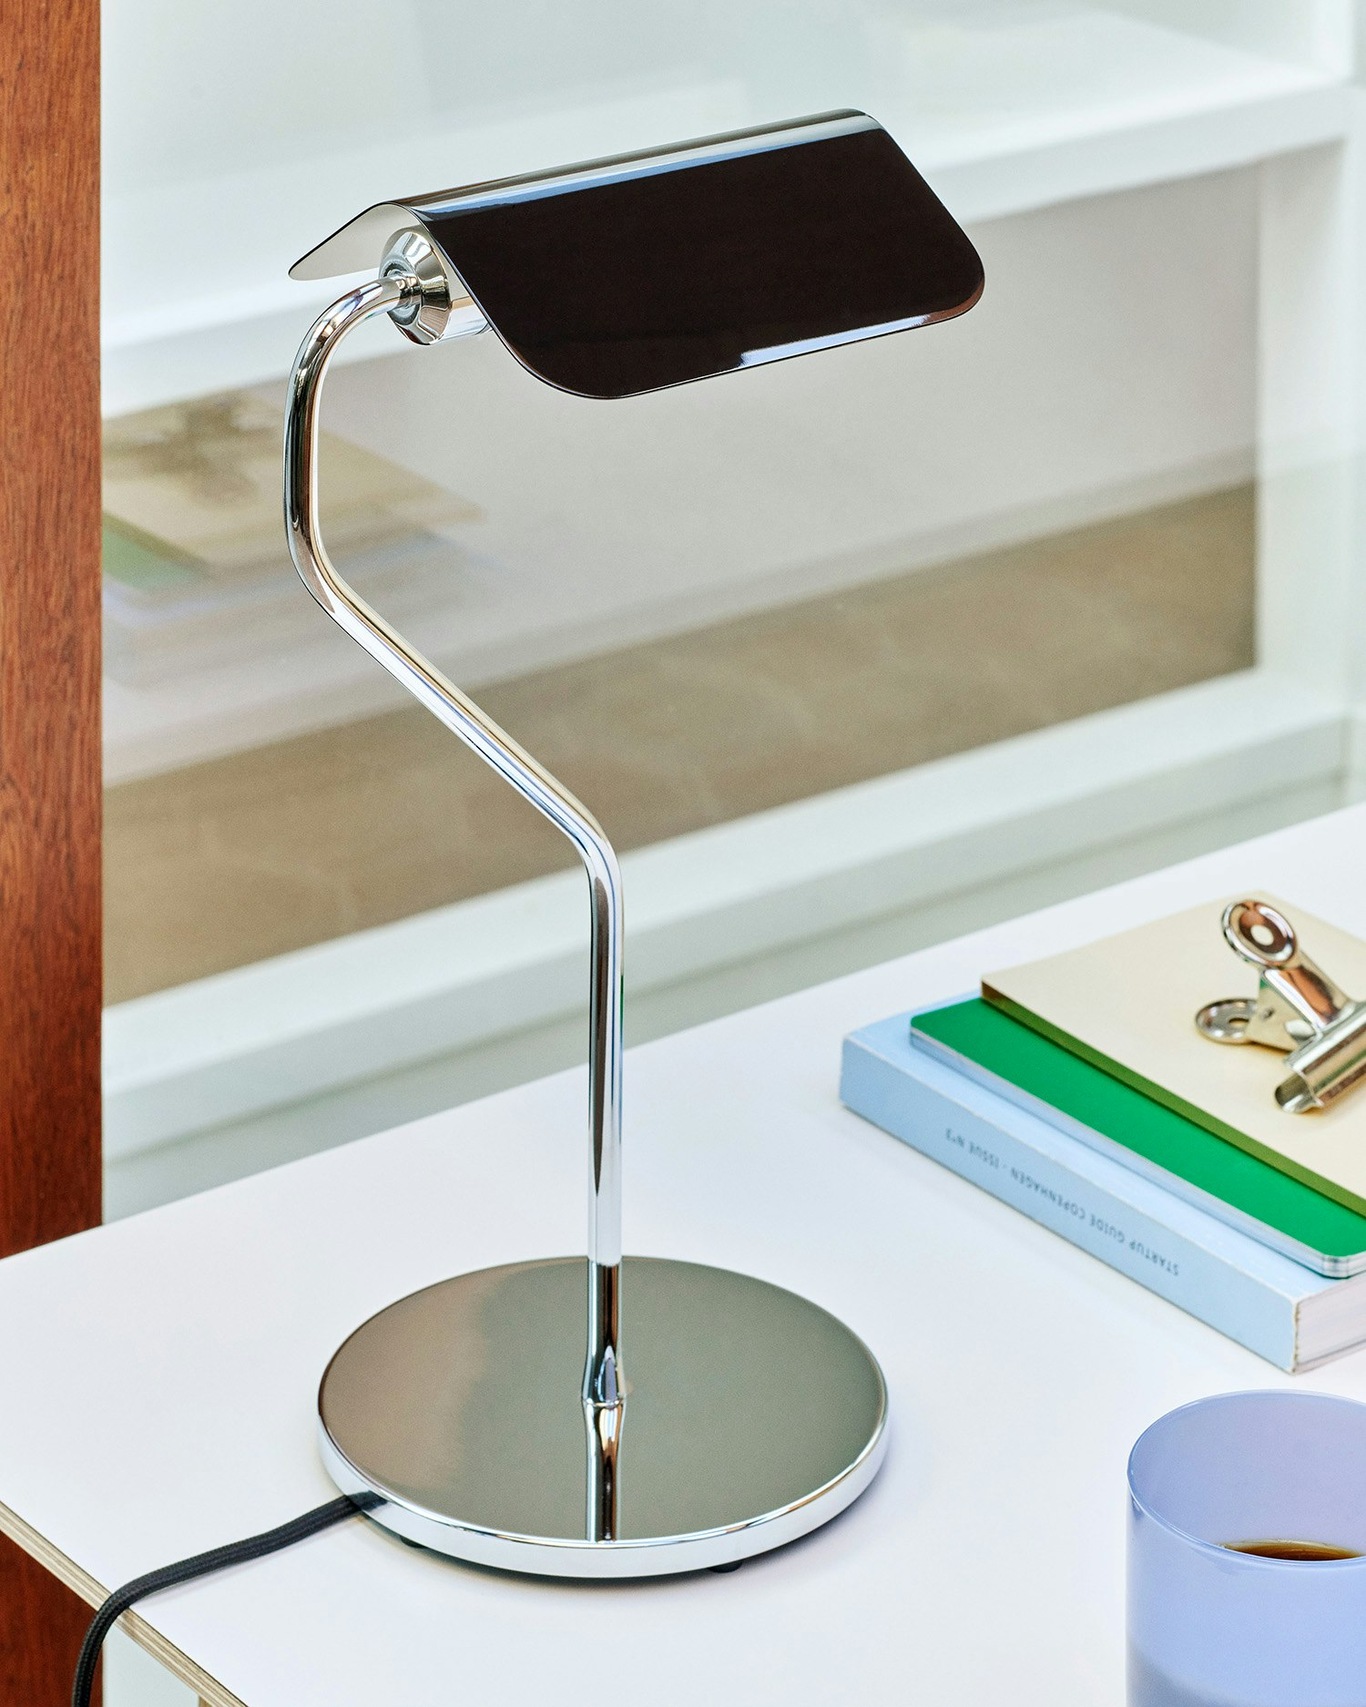 APEX DESK Table lamp By Hay